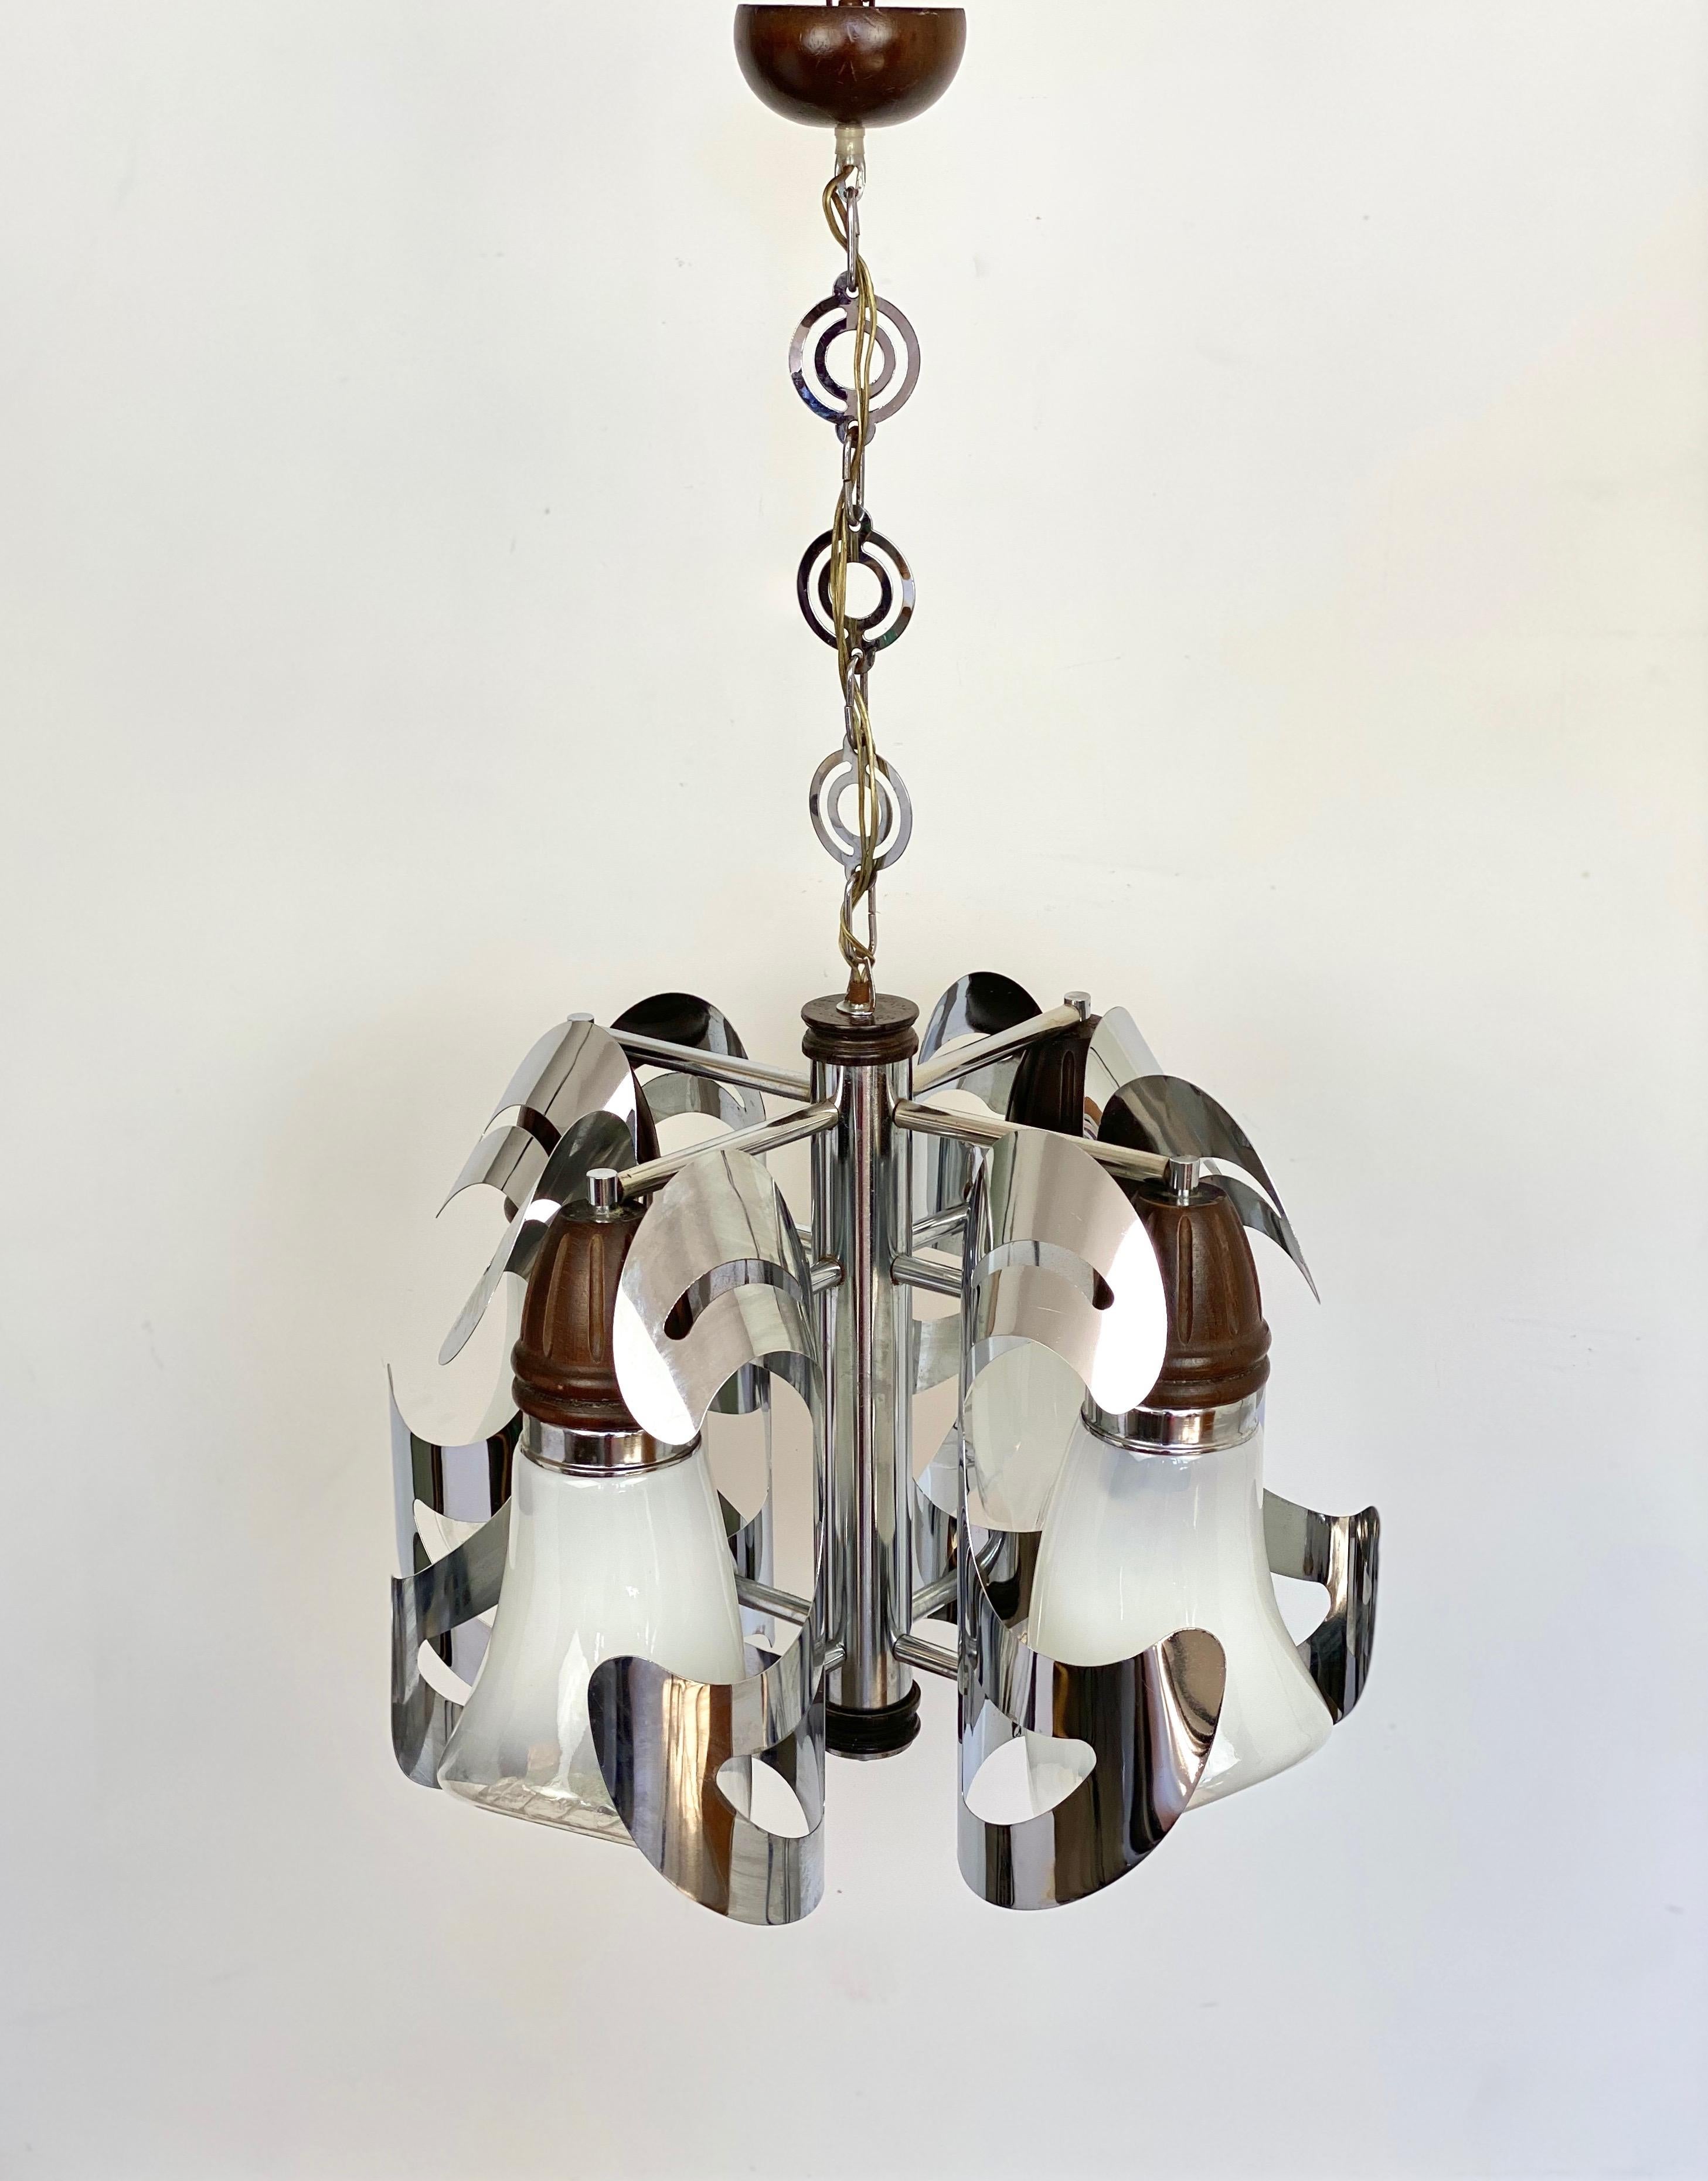 Chandelier by Mazzega Chrome, Wood and Murano Glass, Italy, 1970s For Sale 8